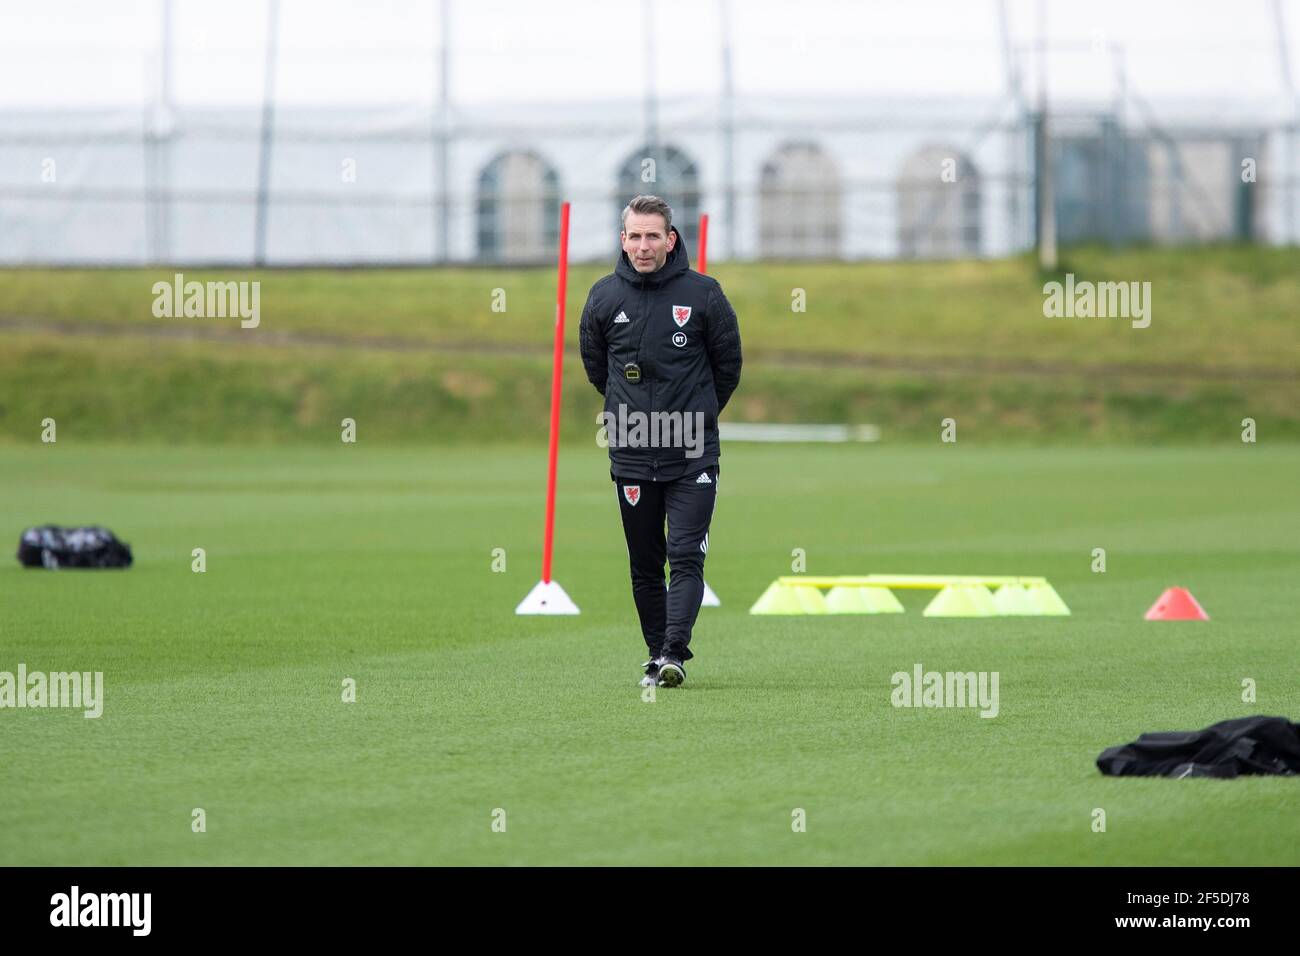 Hensol, Wales, UK. 26th Mar, 2021. Team coach Albert Stuivenberg during Wales national football team training at Vale Resort ahead of matches against Mexico and Czech Republic. Credit: Mark Hawkins/Alamy Live News Stock Photo